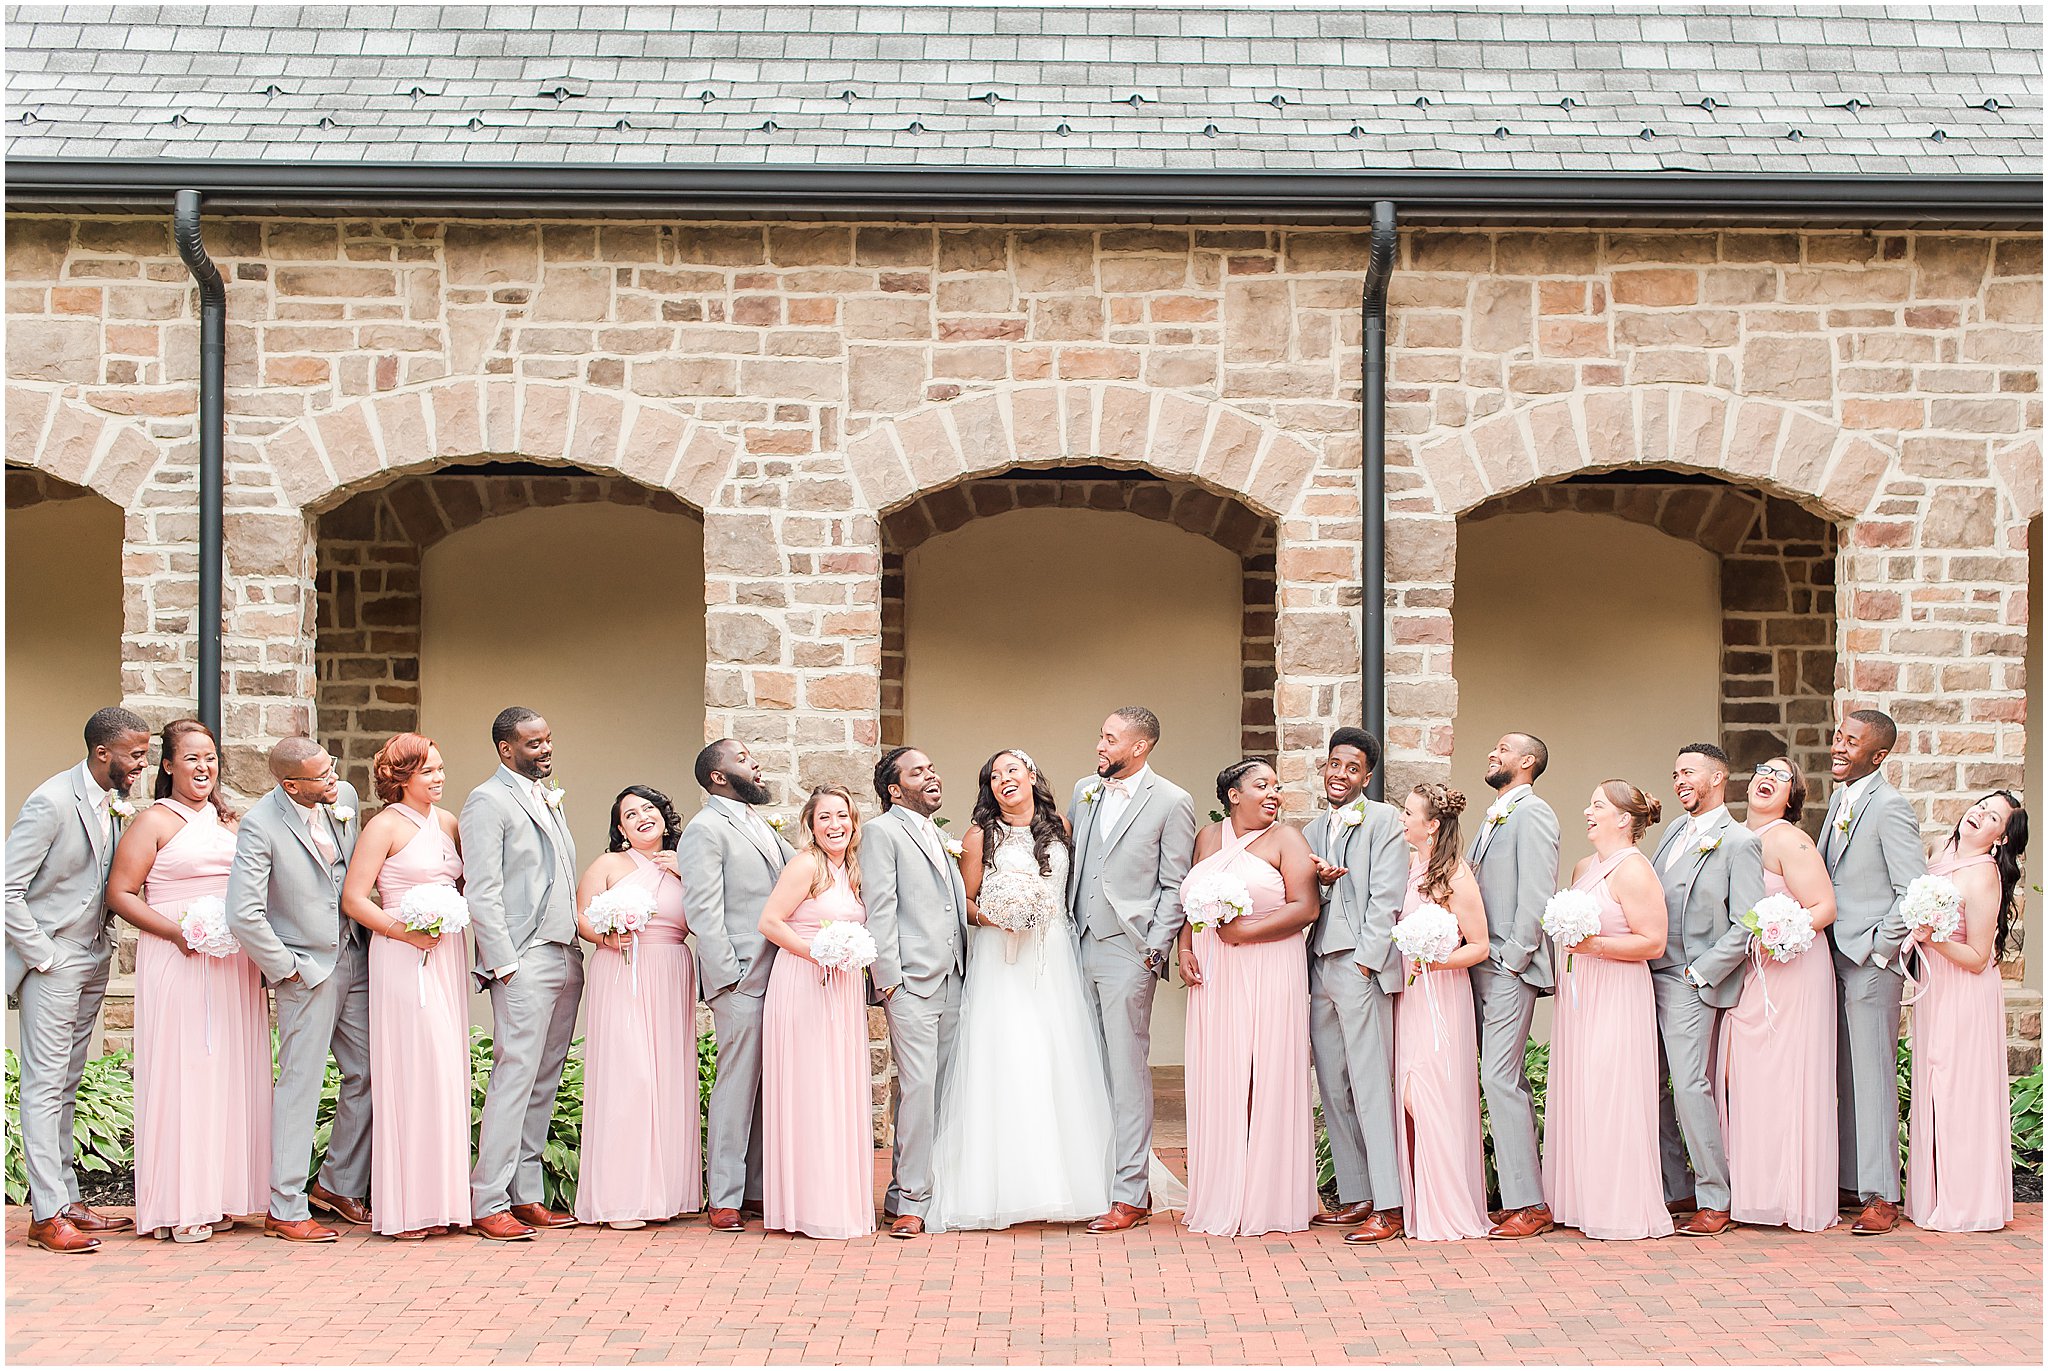 Bridal party portraits at Pinnacle Golf Club | Courtney Carney Photography